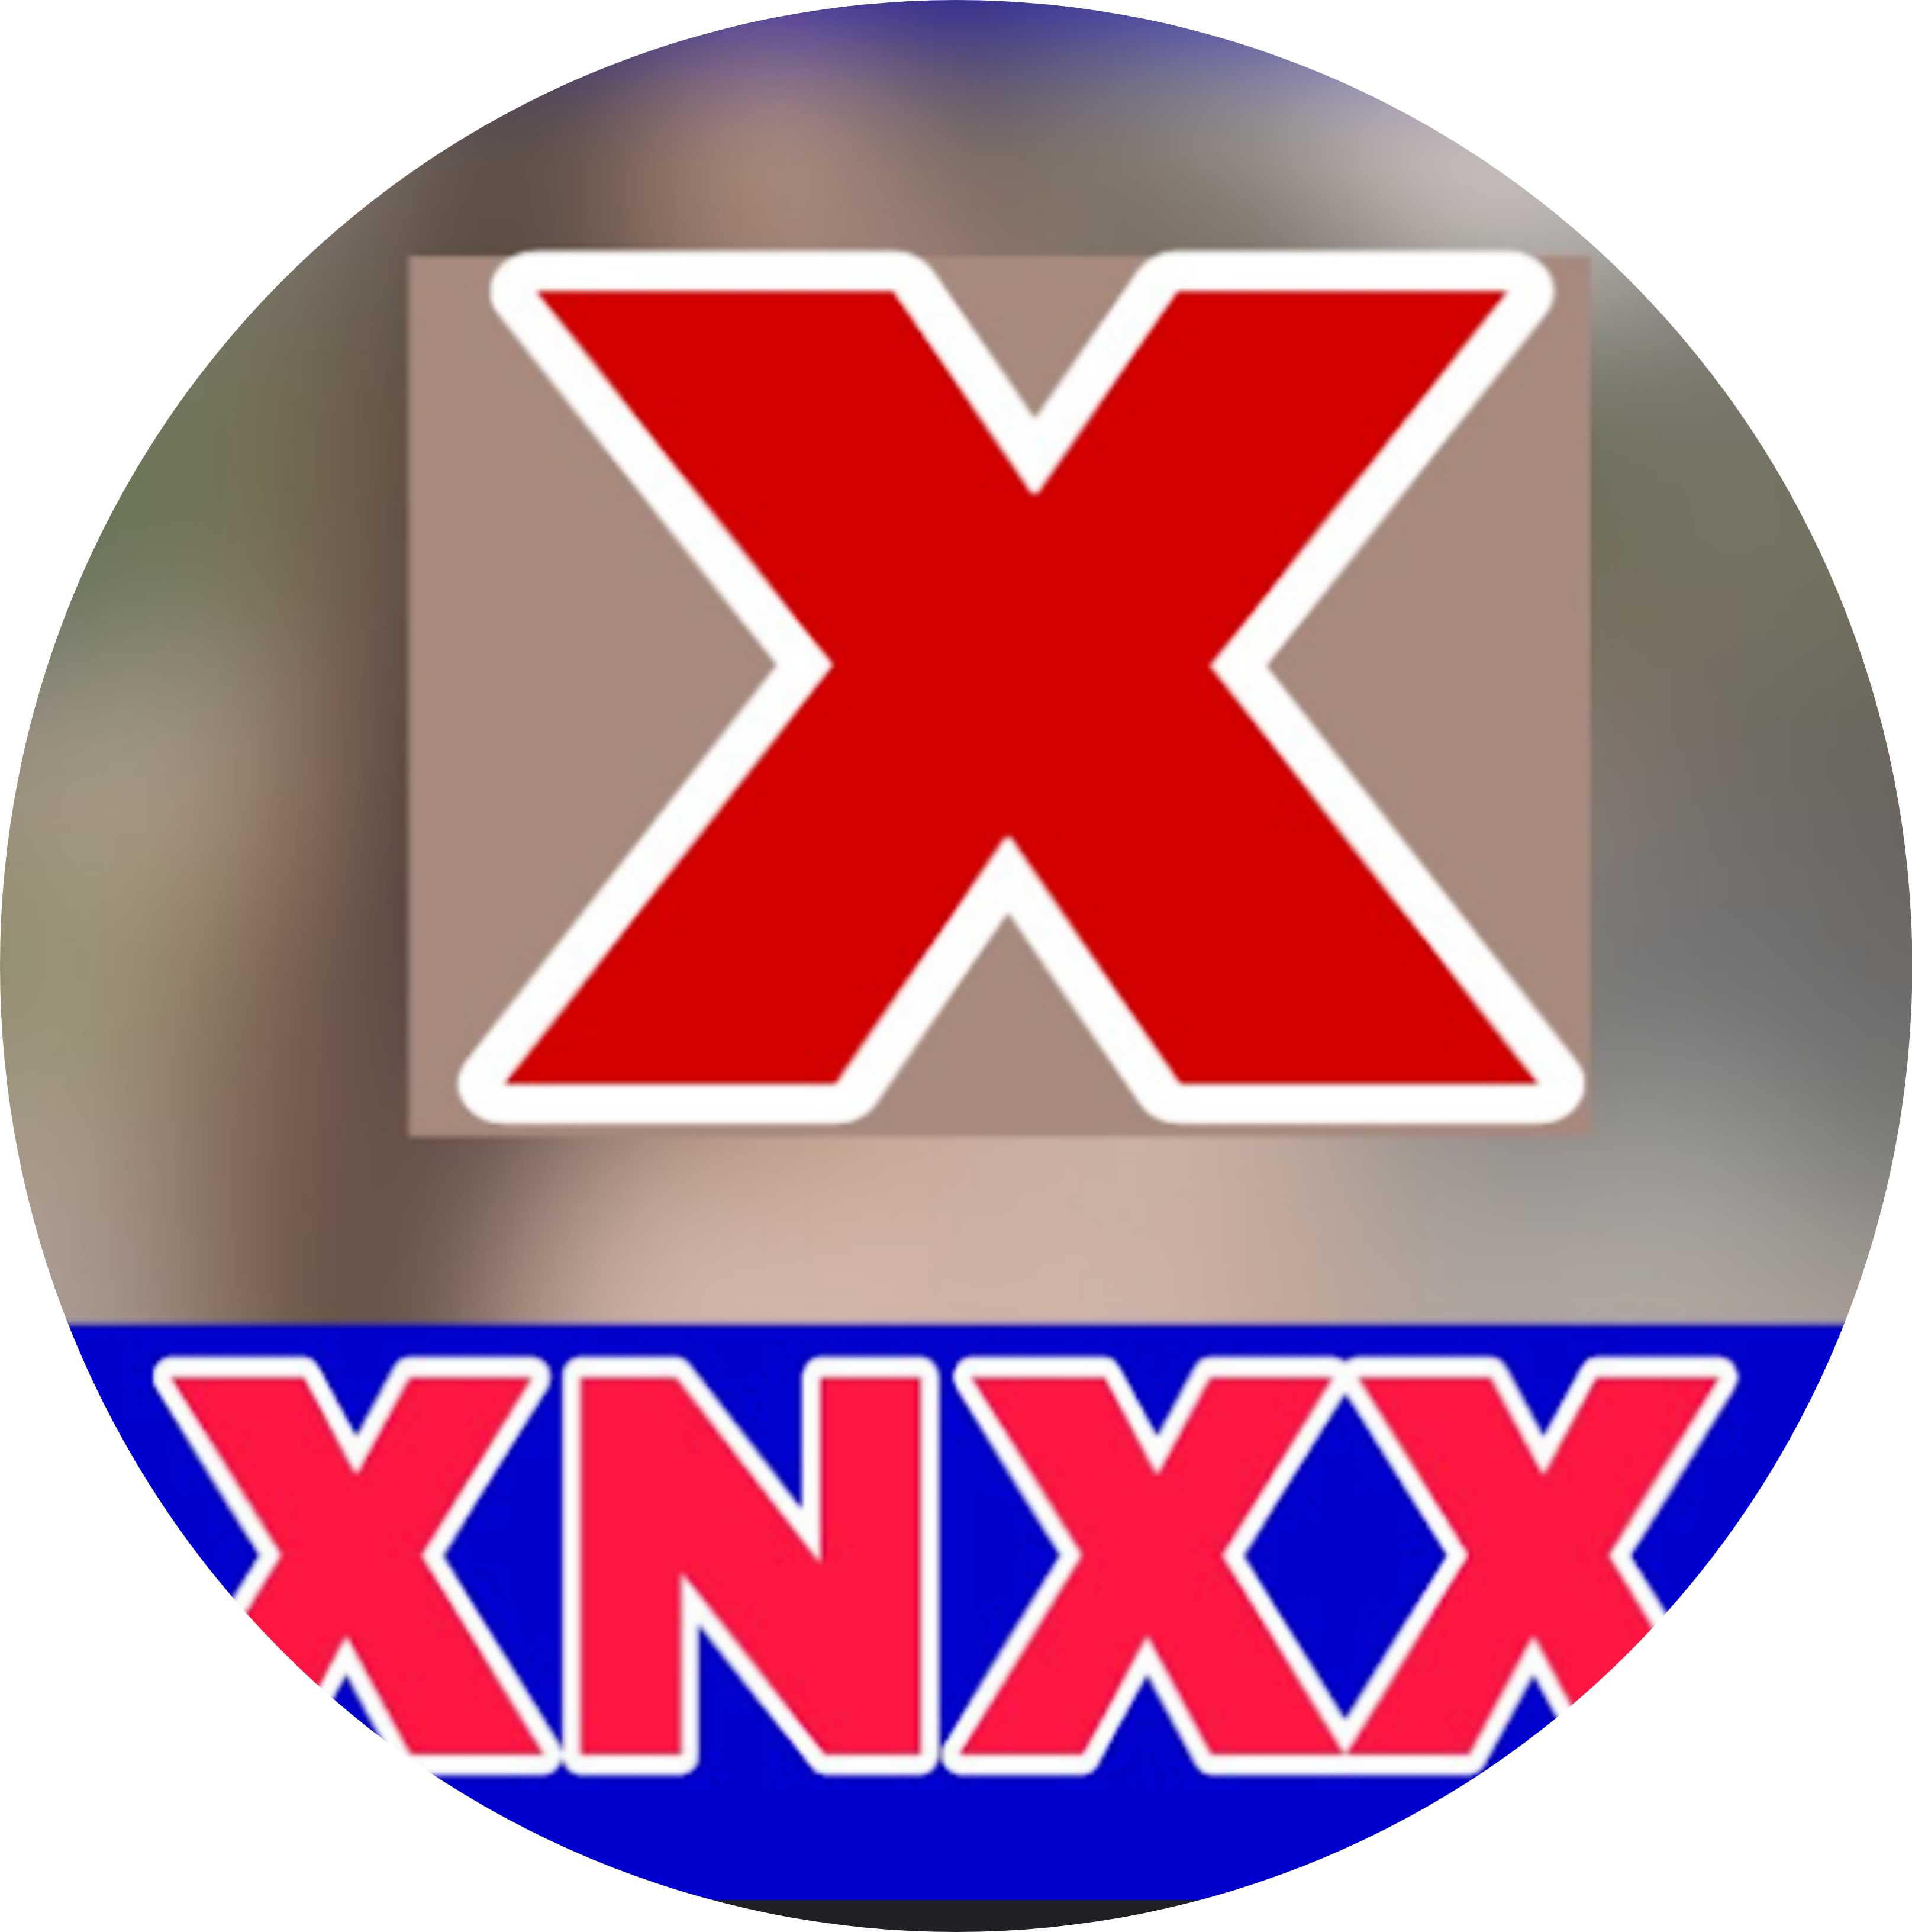 XNXX Logo, symbol, meaning, history, PNG, brand